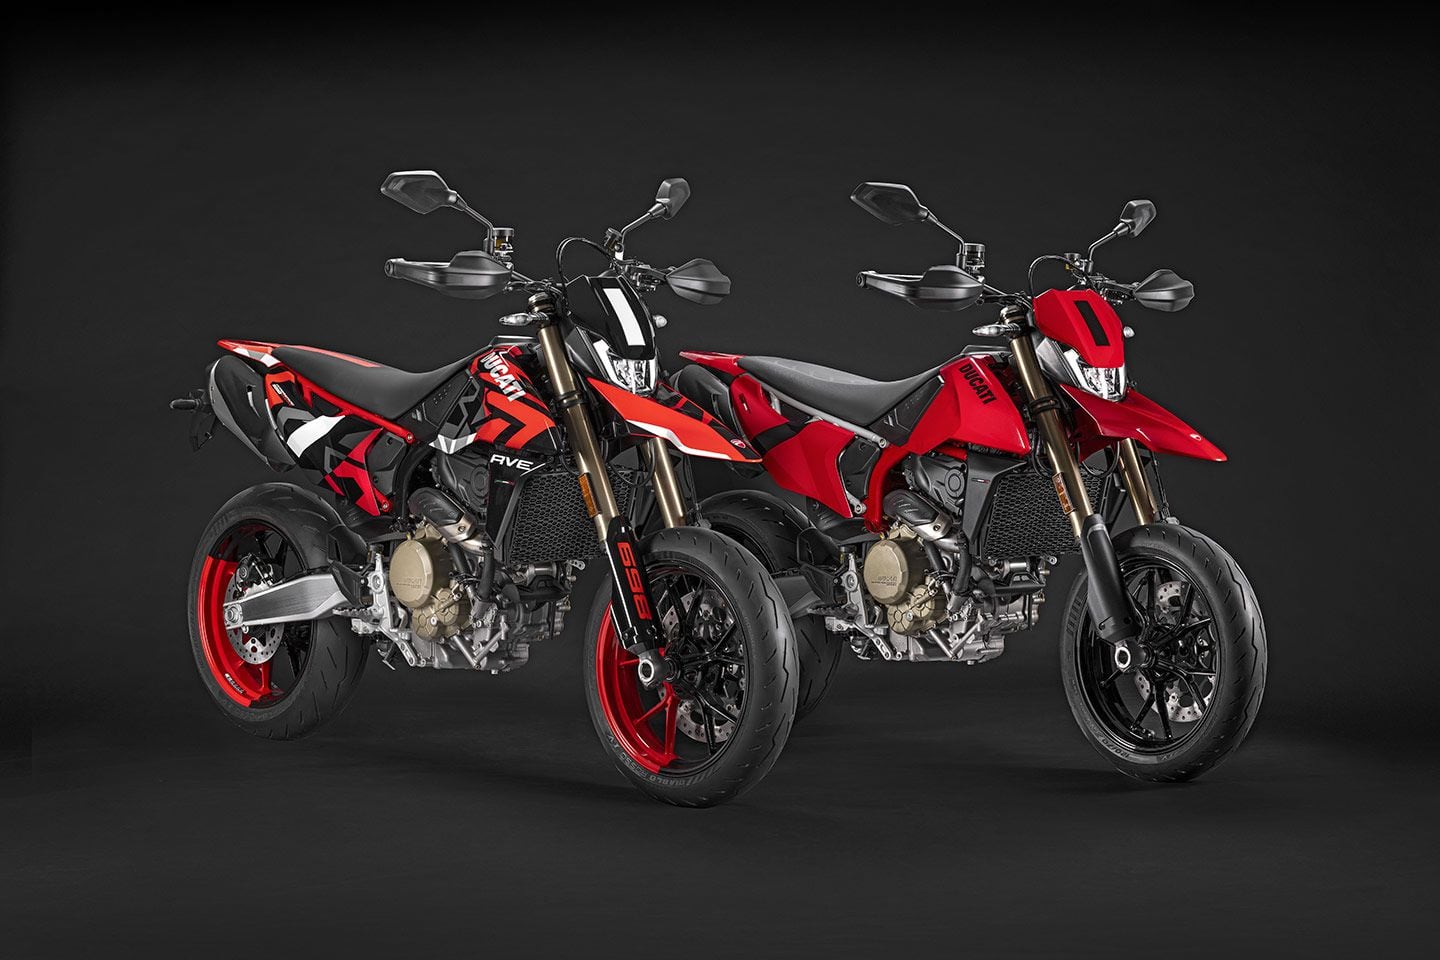 The $14,495 2024 Ducati Hypermotard 689 Mono RVE and standard $12,995 Mono mark Ducati’s return to a single-cylinder engine and entry into a new class and market.